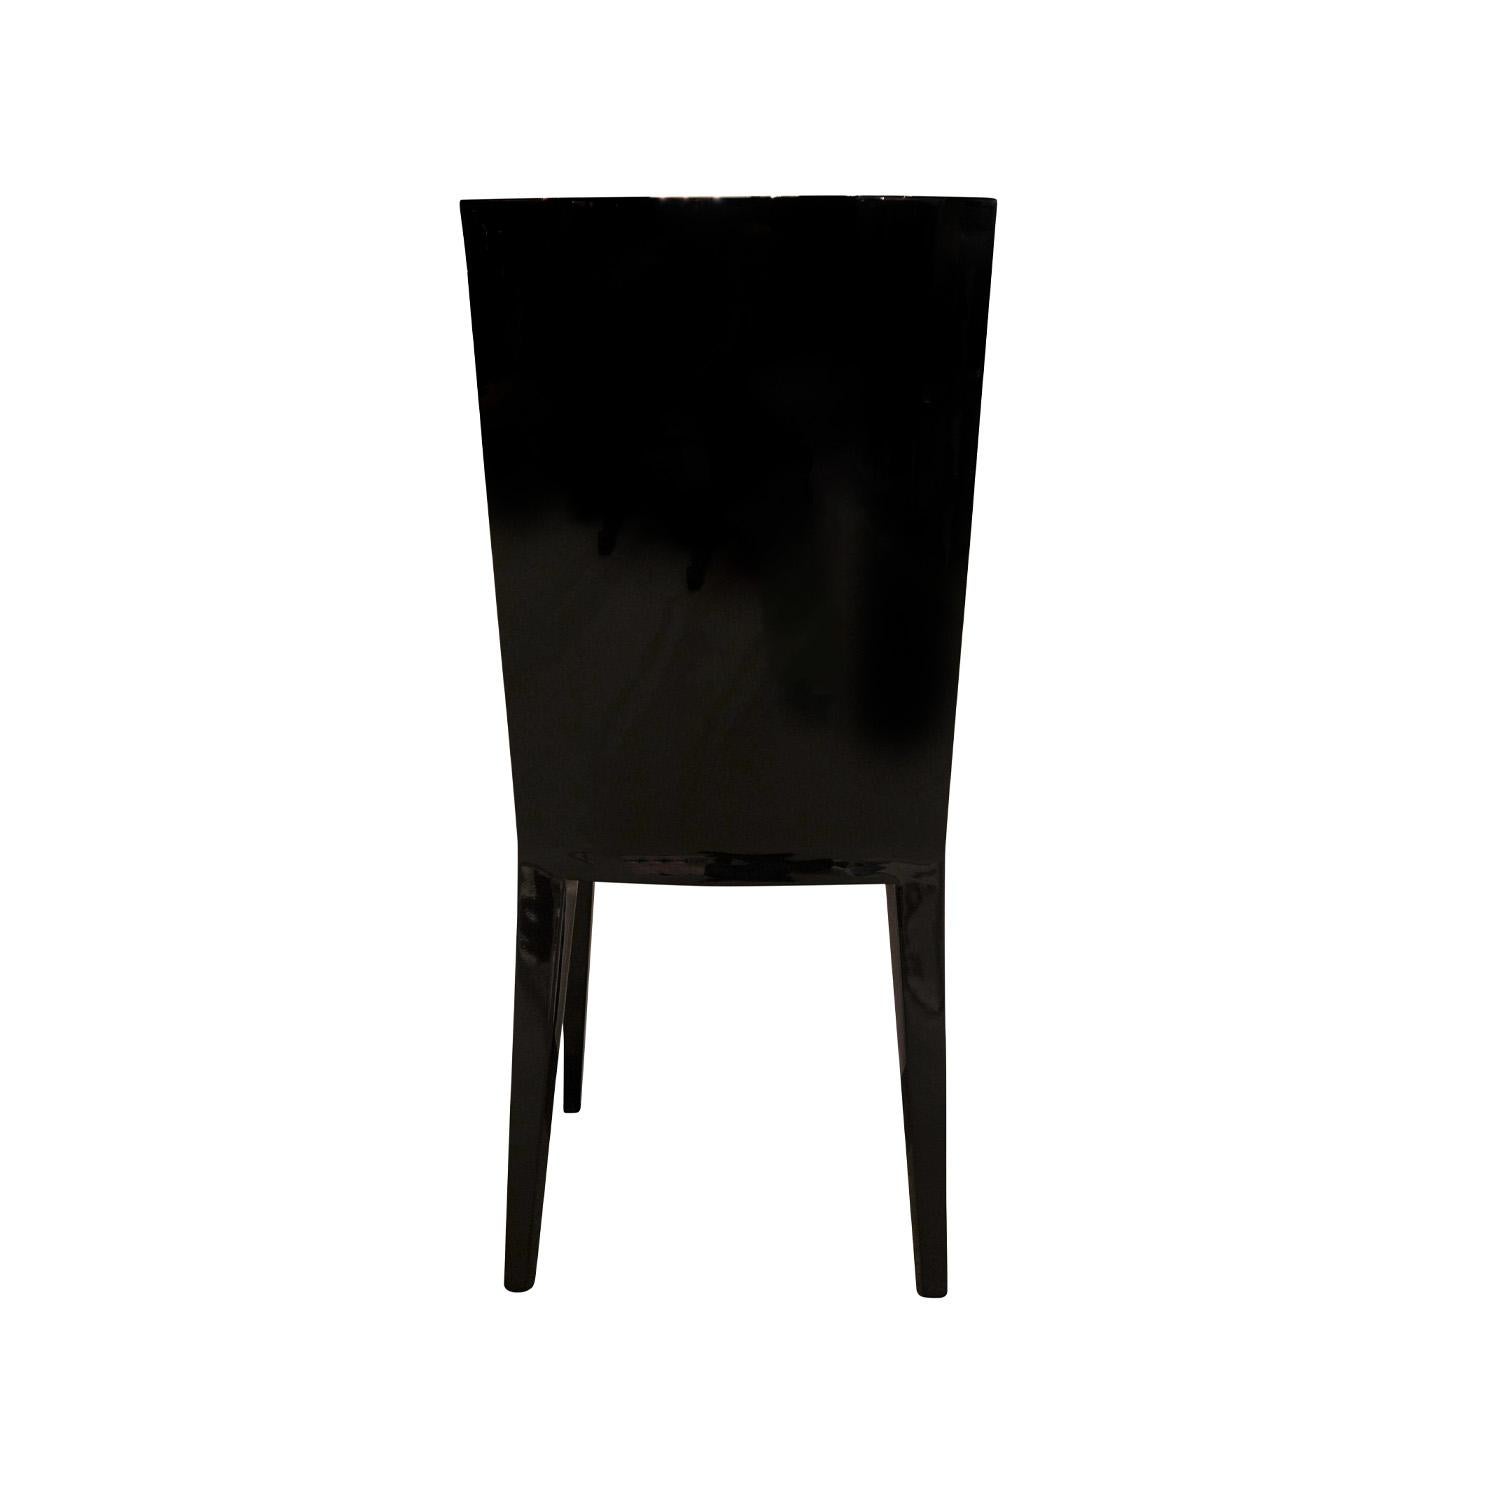 Hand-Crafted Set of 4 Chic Game/Dining Chairs in Black Lacquer with Bone Inlays 1980s